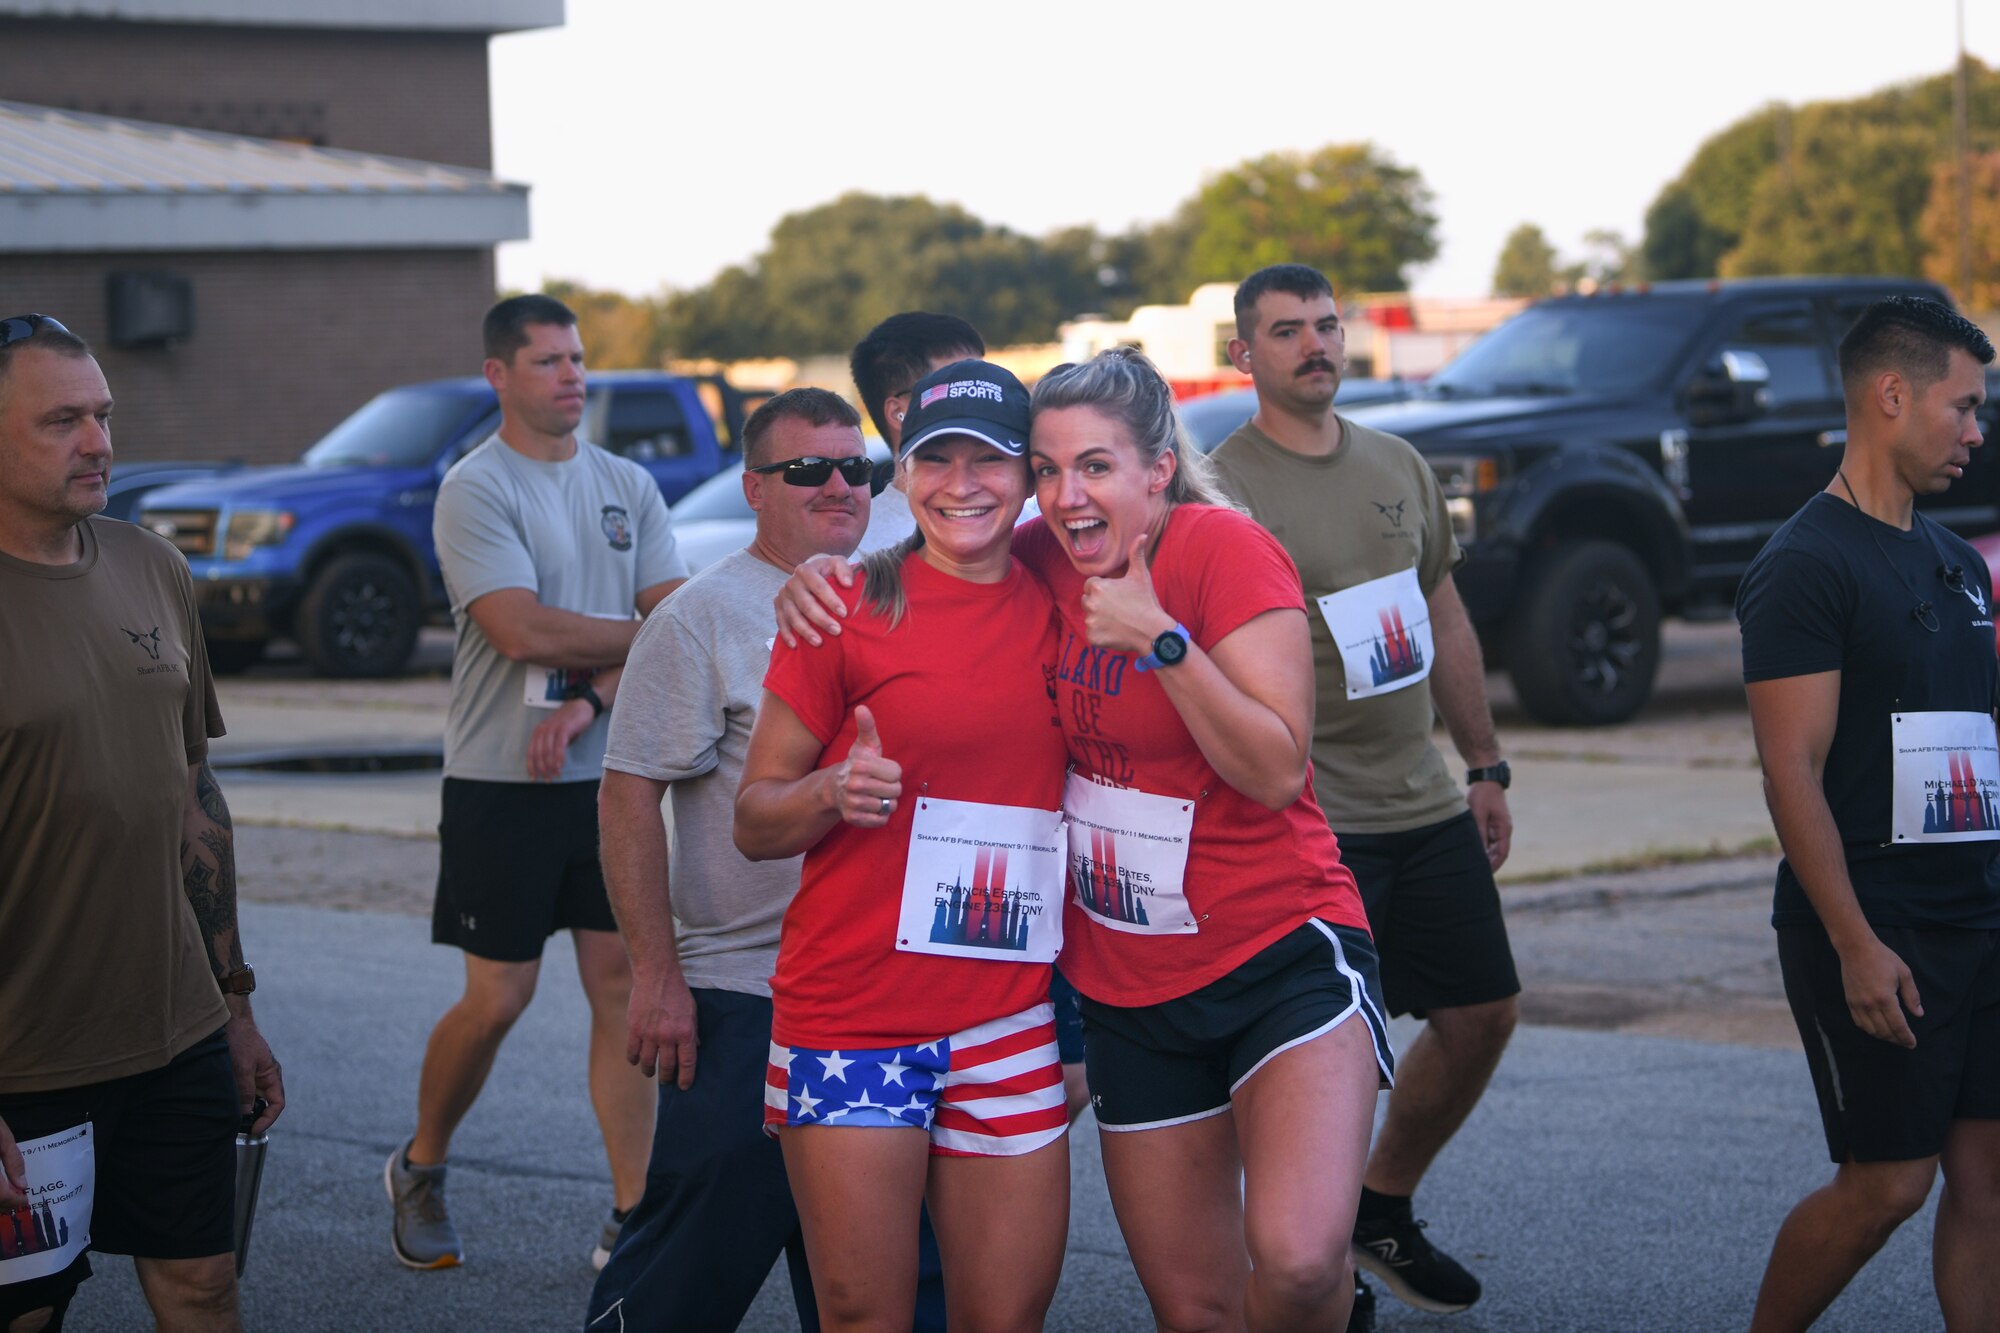 Two participants smiles at the camera as they were walking to the starting point of the 5k.